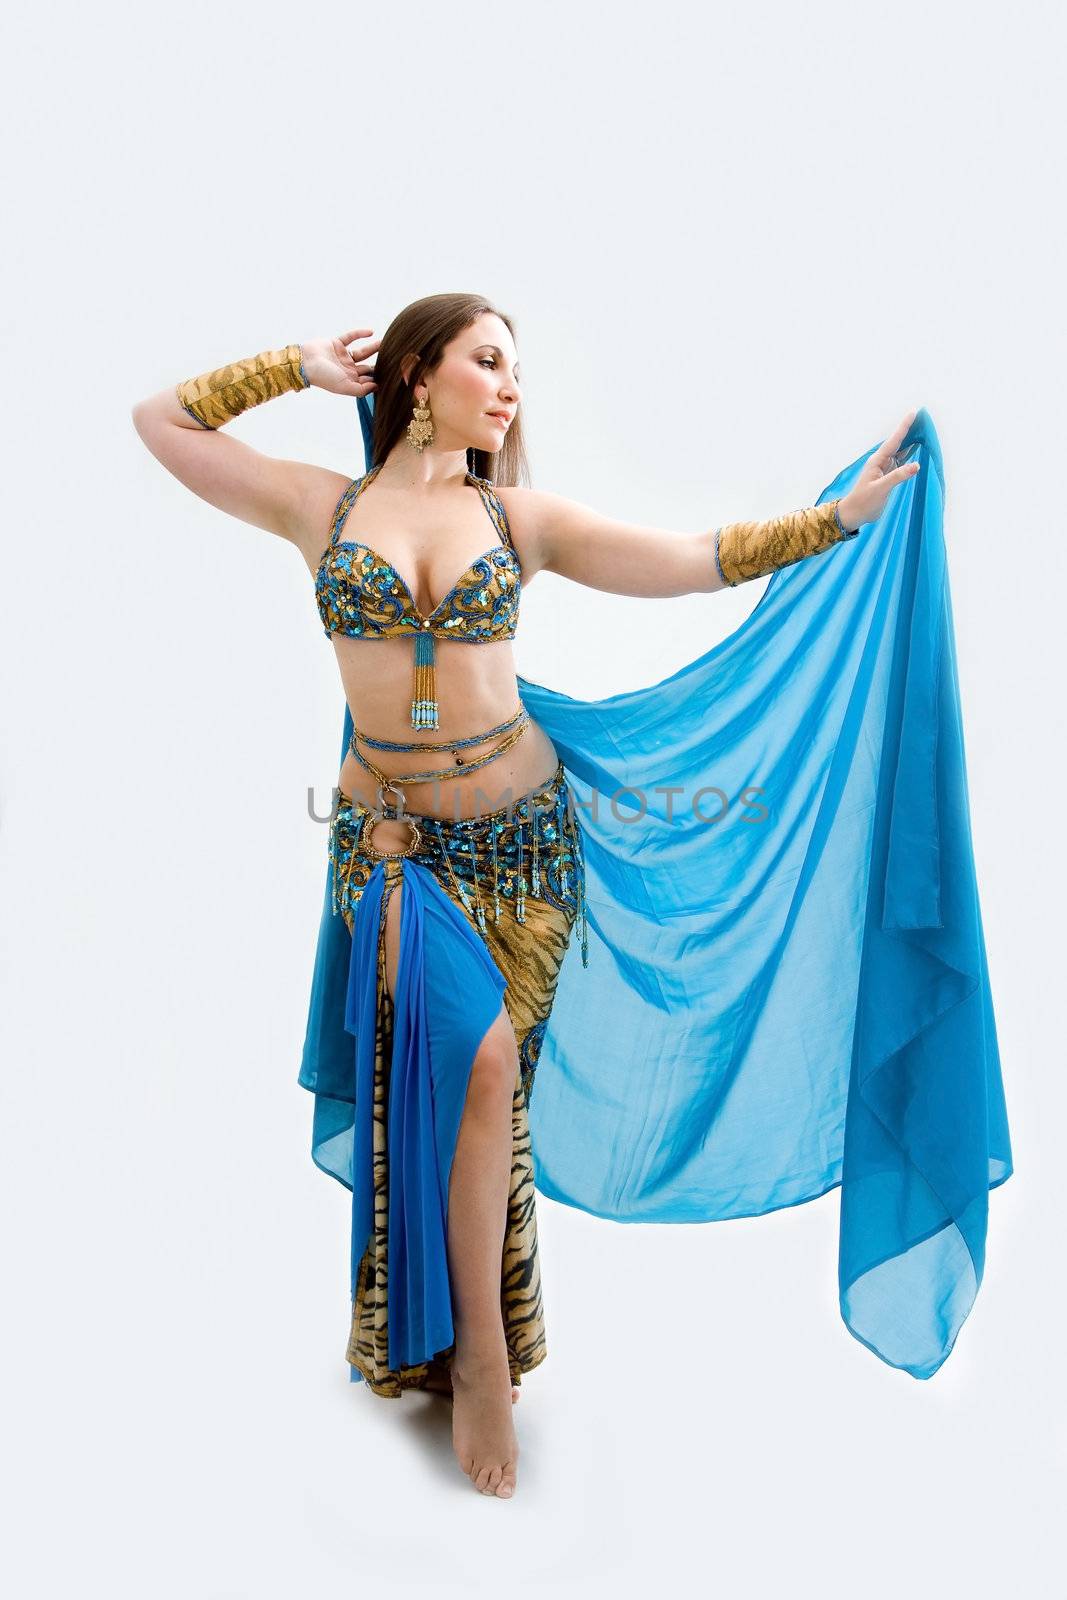 Beautiful belly dancer in blue outfit holding veil, isolated